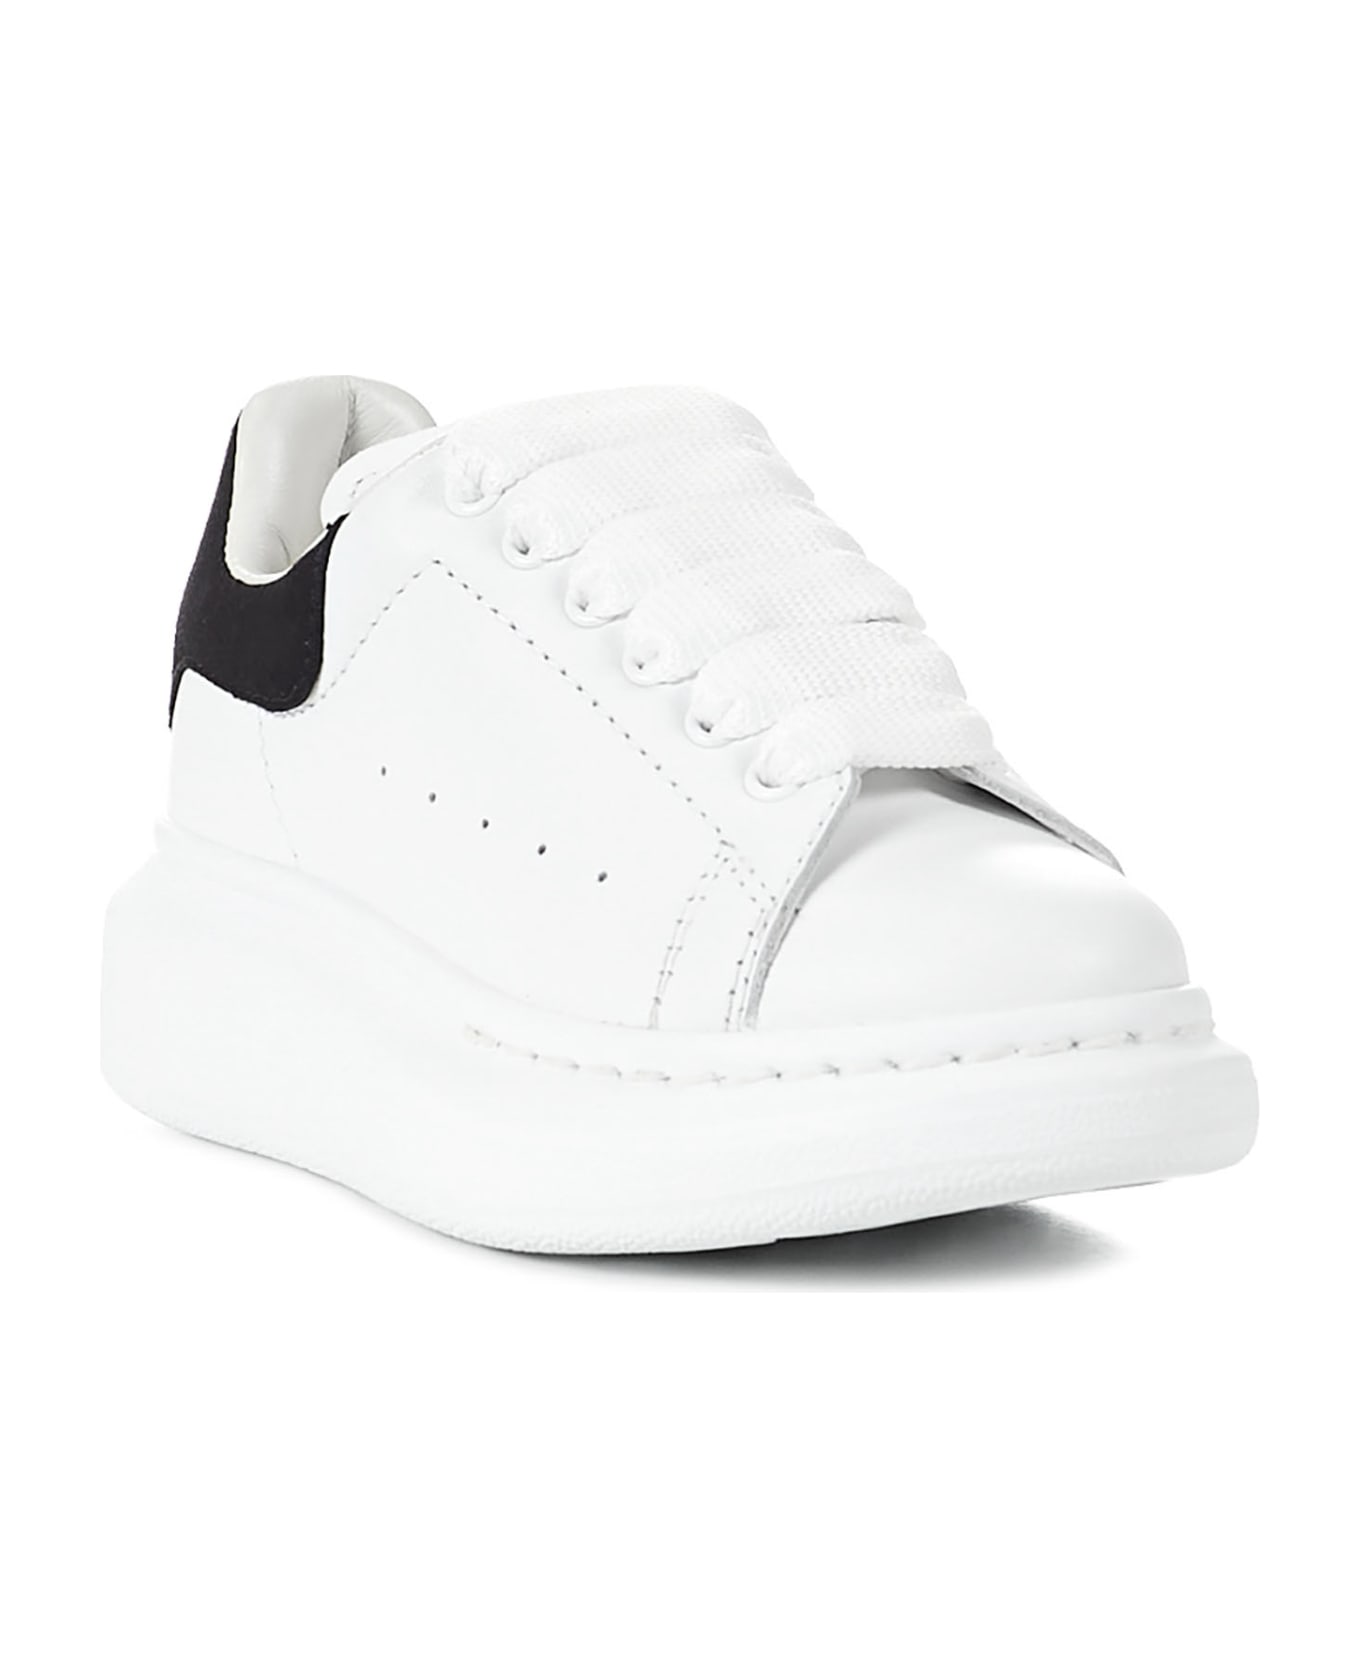 Alexander McQueen Oversize Sneakers - White and black